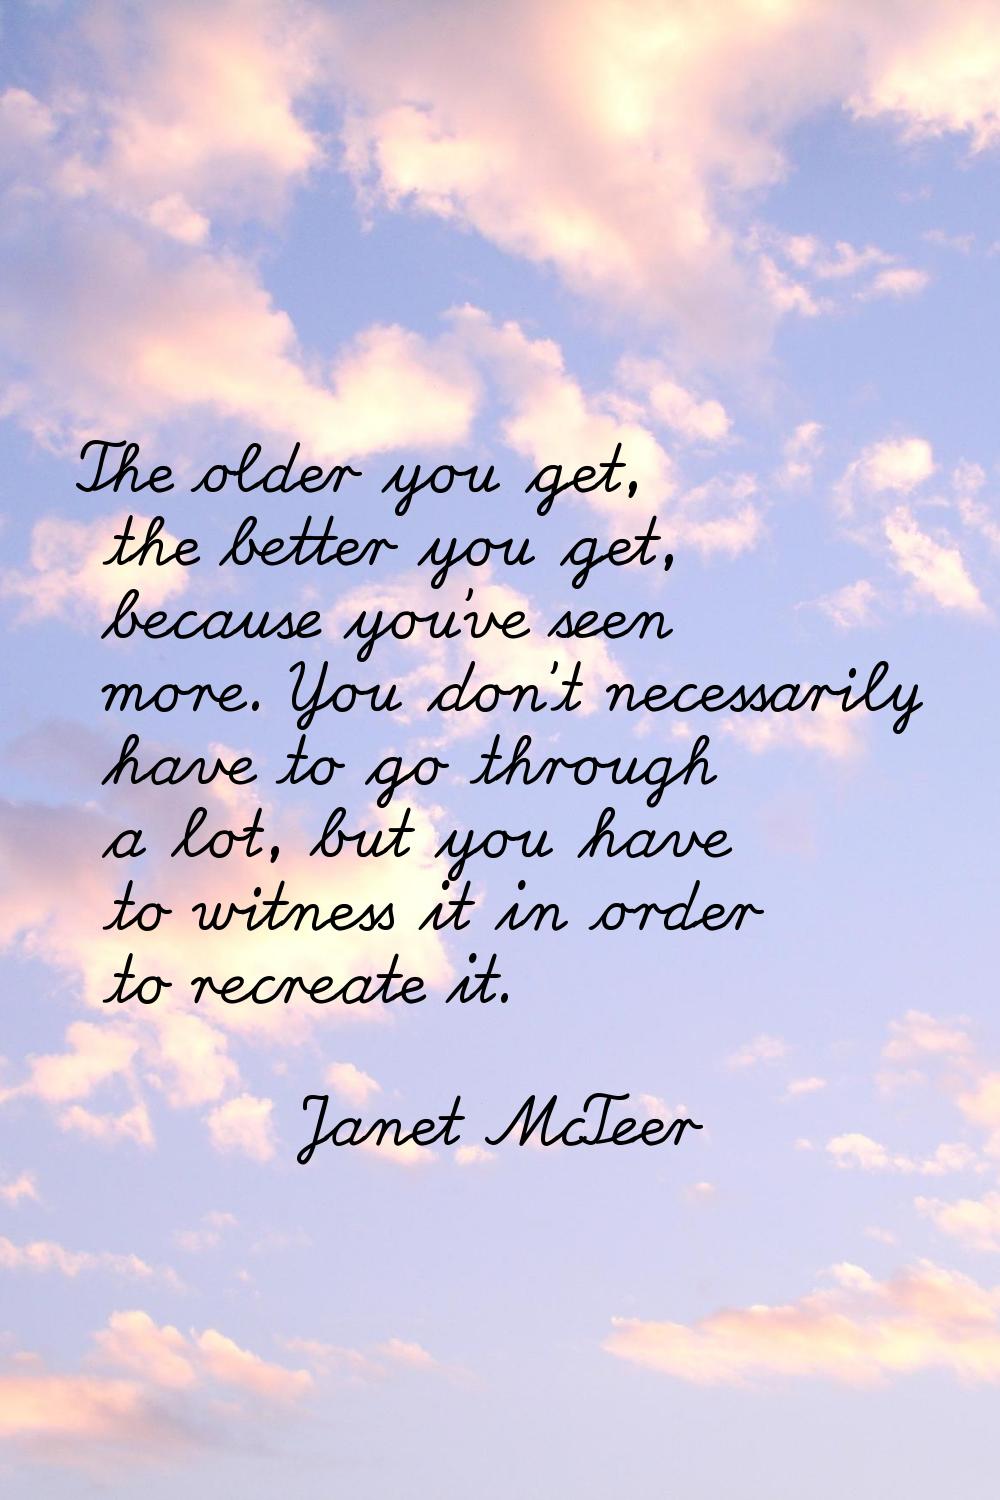 The older you get, the better you get, because you've seen more. You don't necessarily have to go t